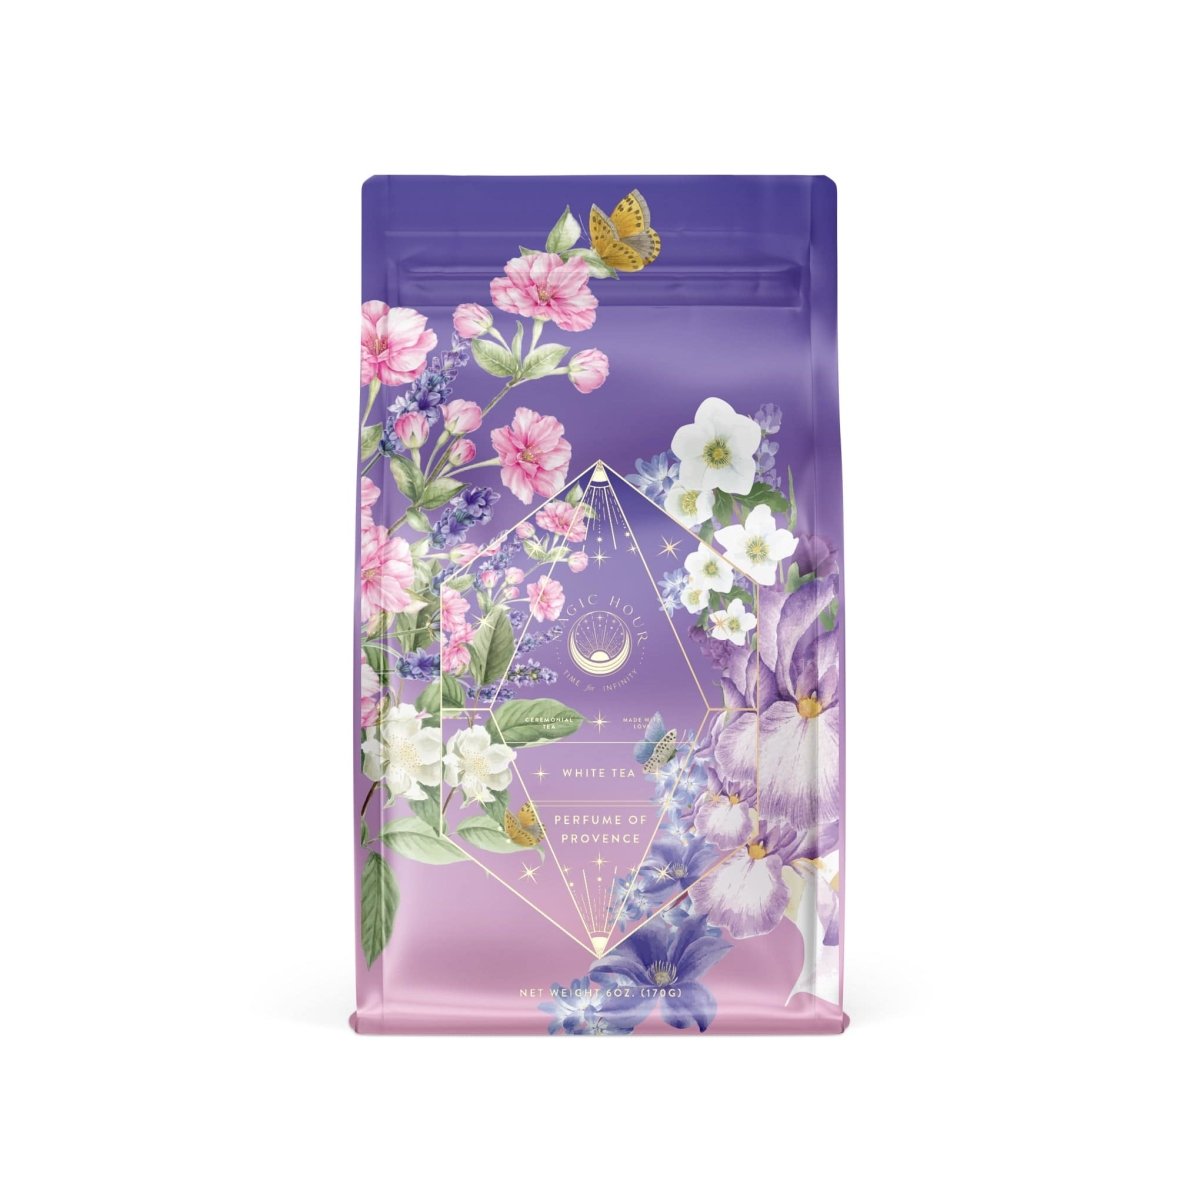 Perfumes of Provence: Lavender Bouquet Tea for Calm Moods and Beautiful Skin-Luxe Pouch (Refill your Jar with up to 65 Cups)-Magic Hour